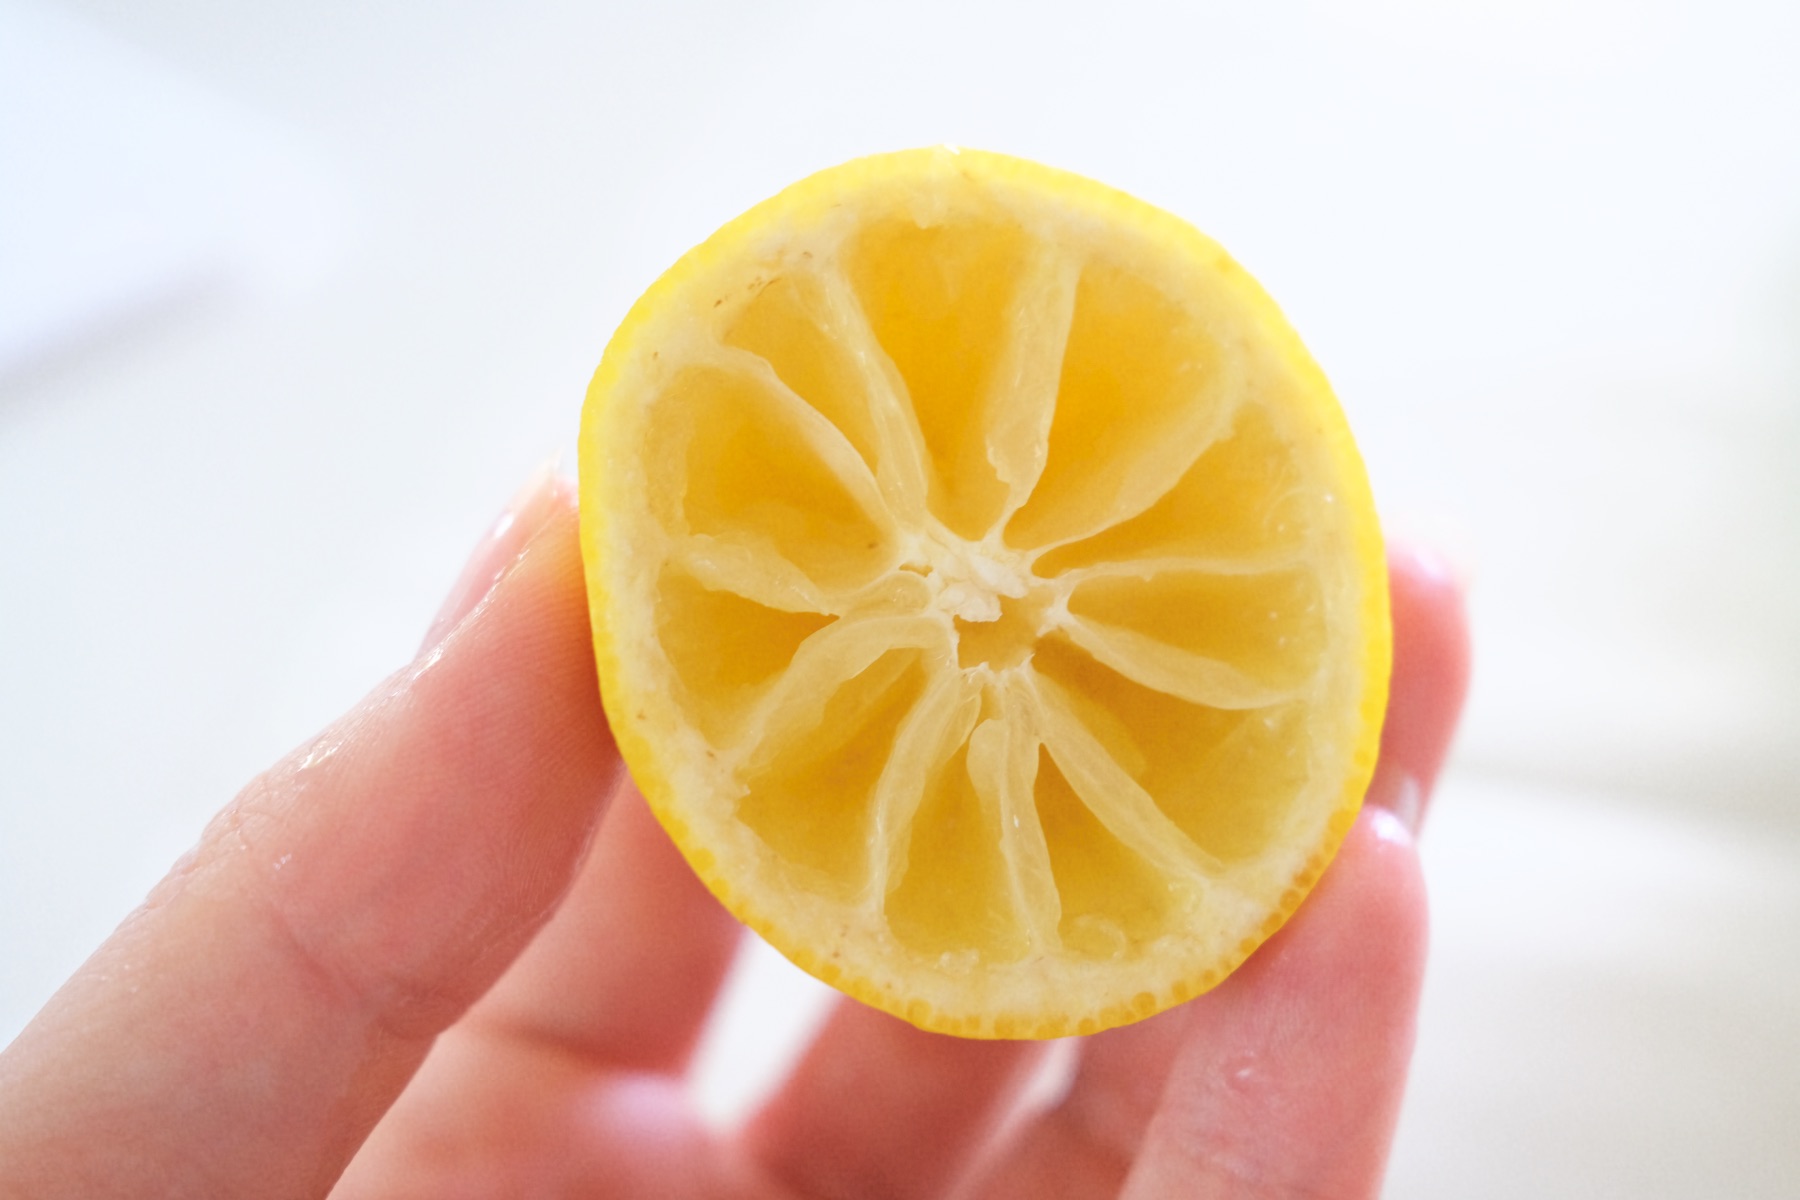 cut the pulp out of the lemon to make a stamp